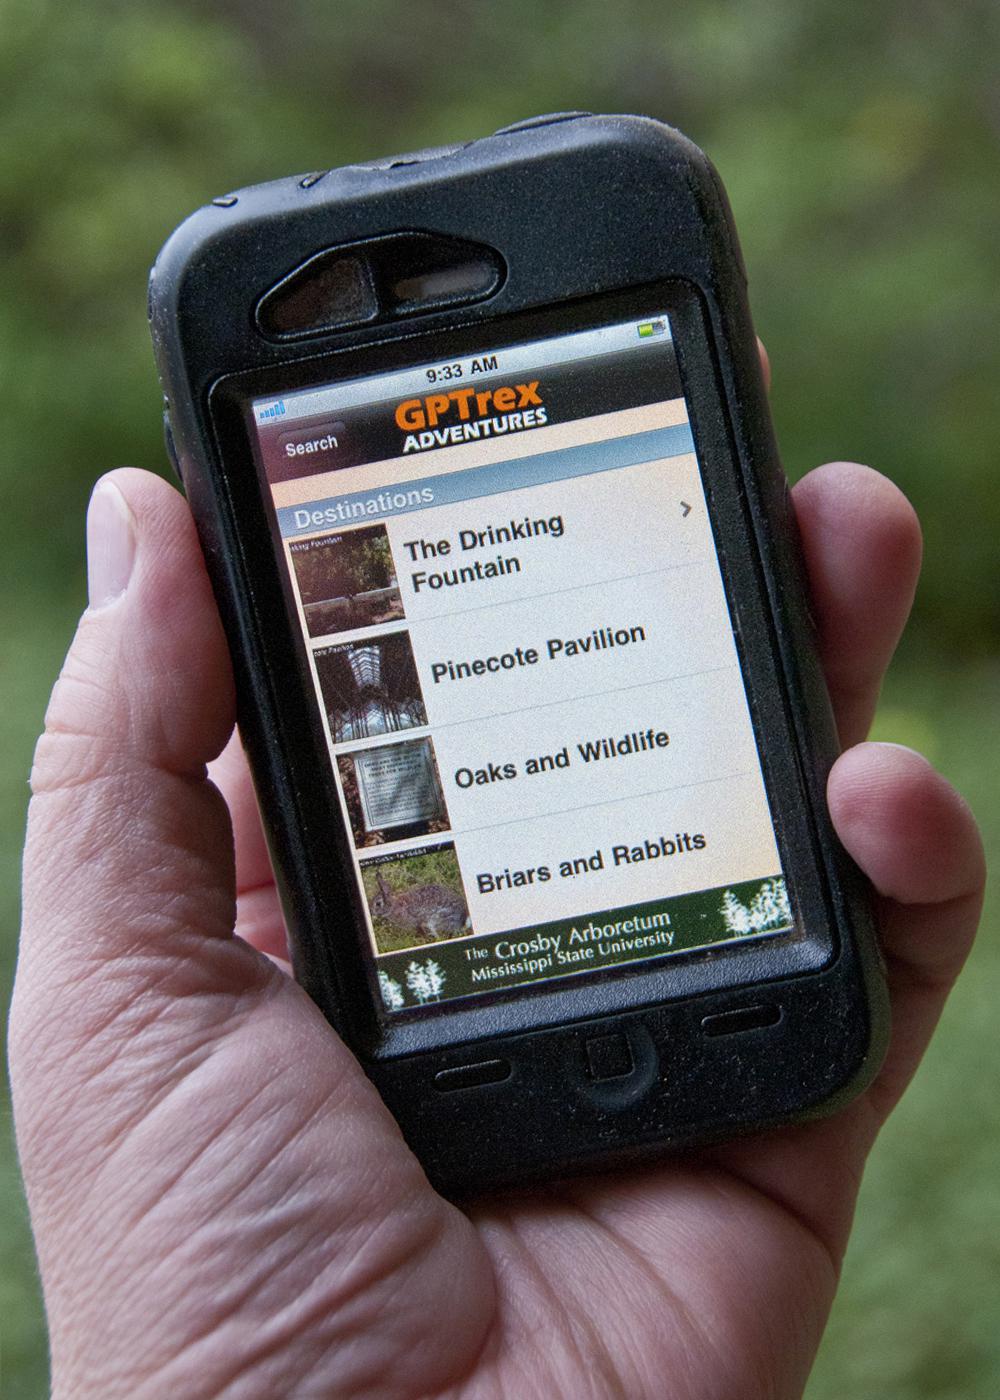 Visitors to the Crosby Arboretum in Picayune who have iPhones, iPads or iPod Touches can now experience the pond and south Savanna journey by downloading the free GPTrex App. (Photo by Scott Corey)